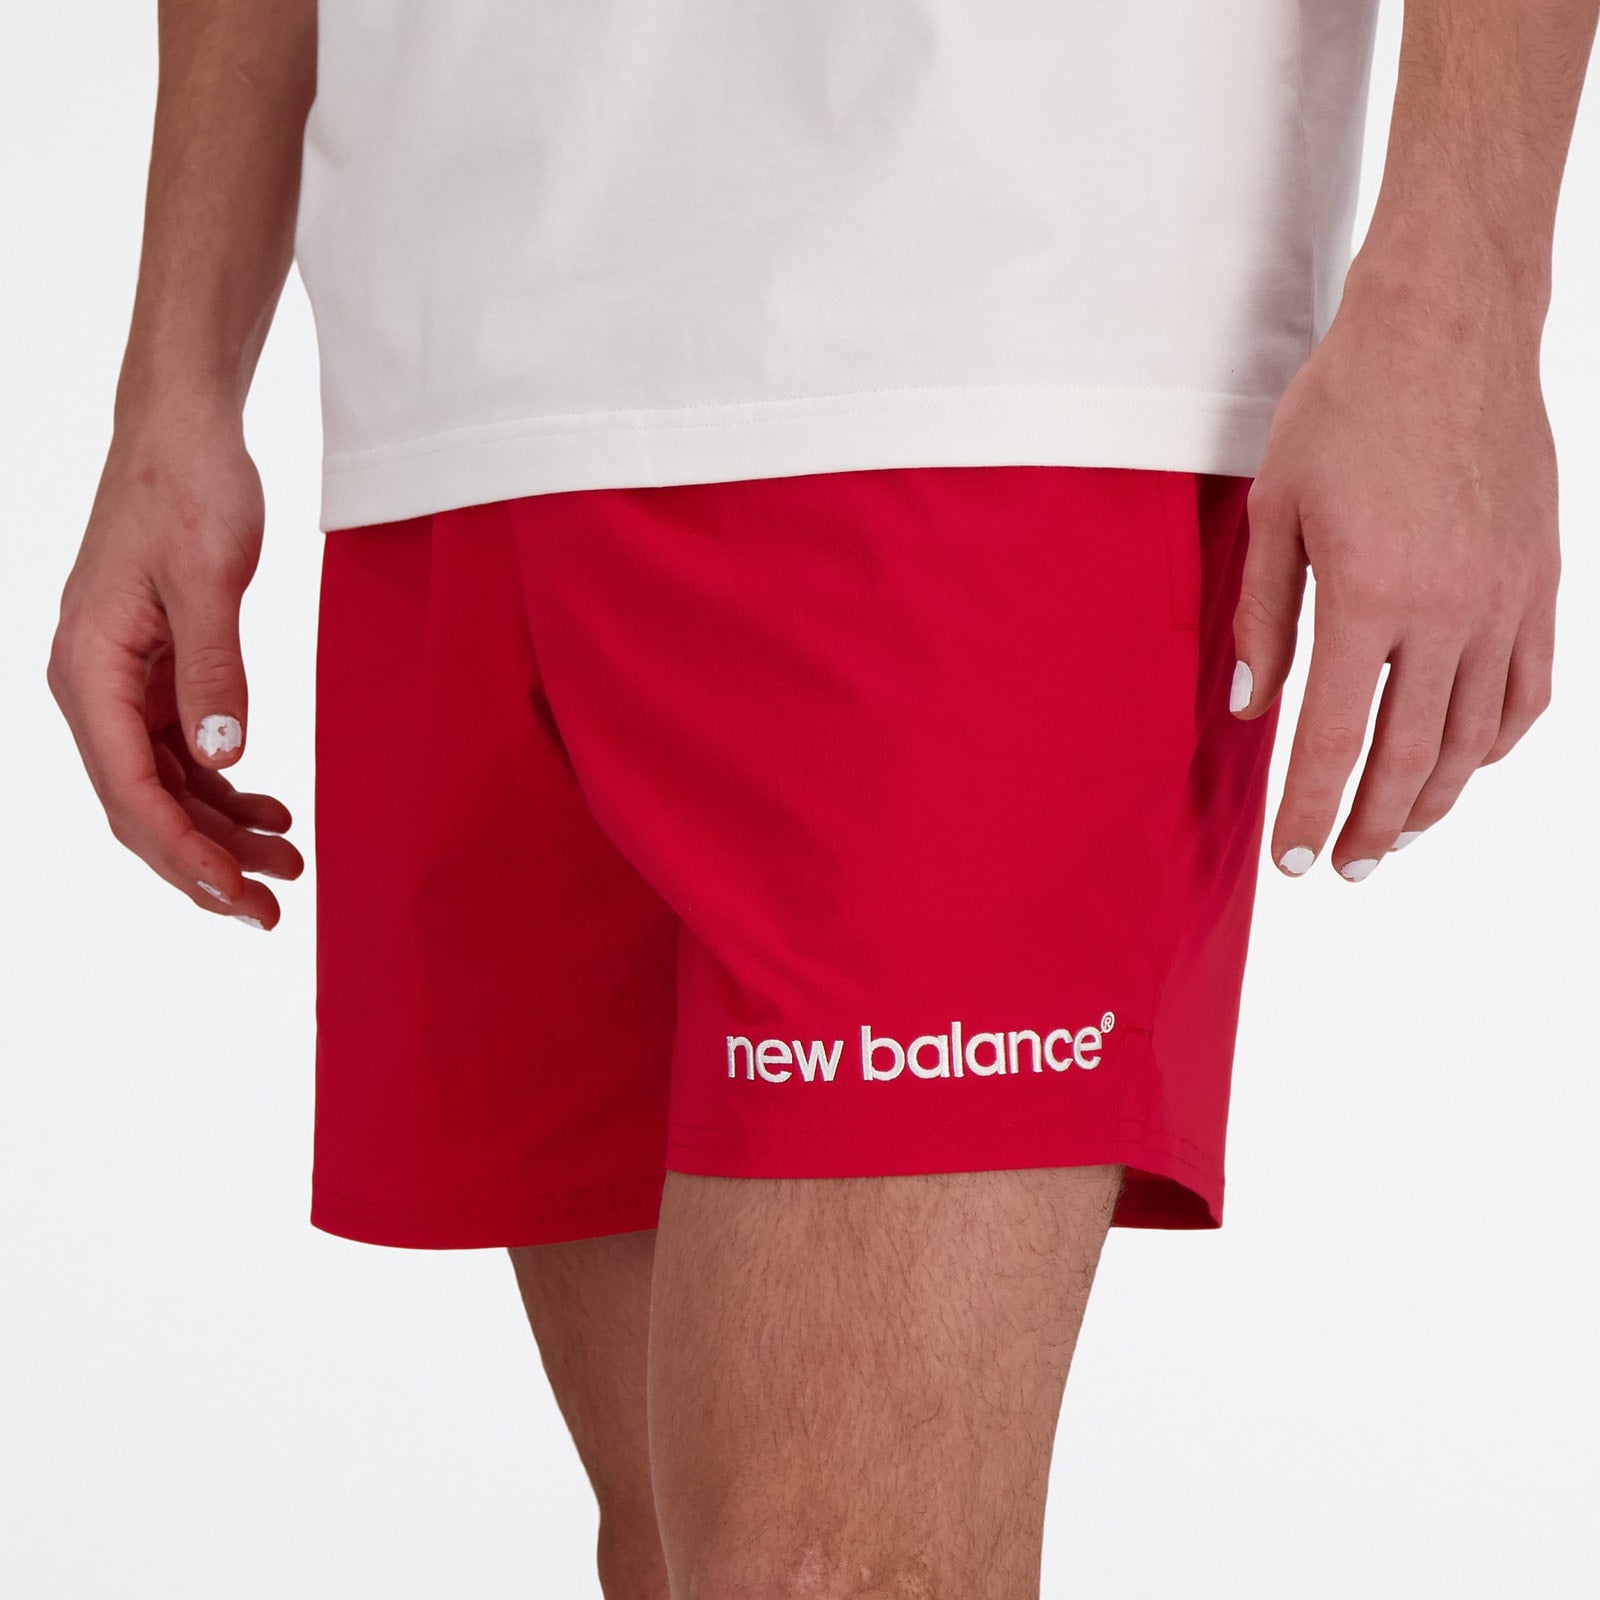 Archive Stretch Wind Shorts